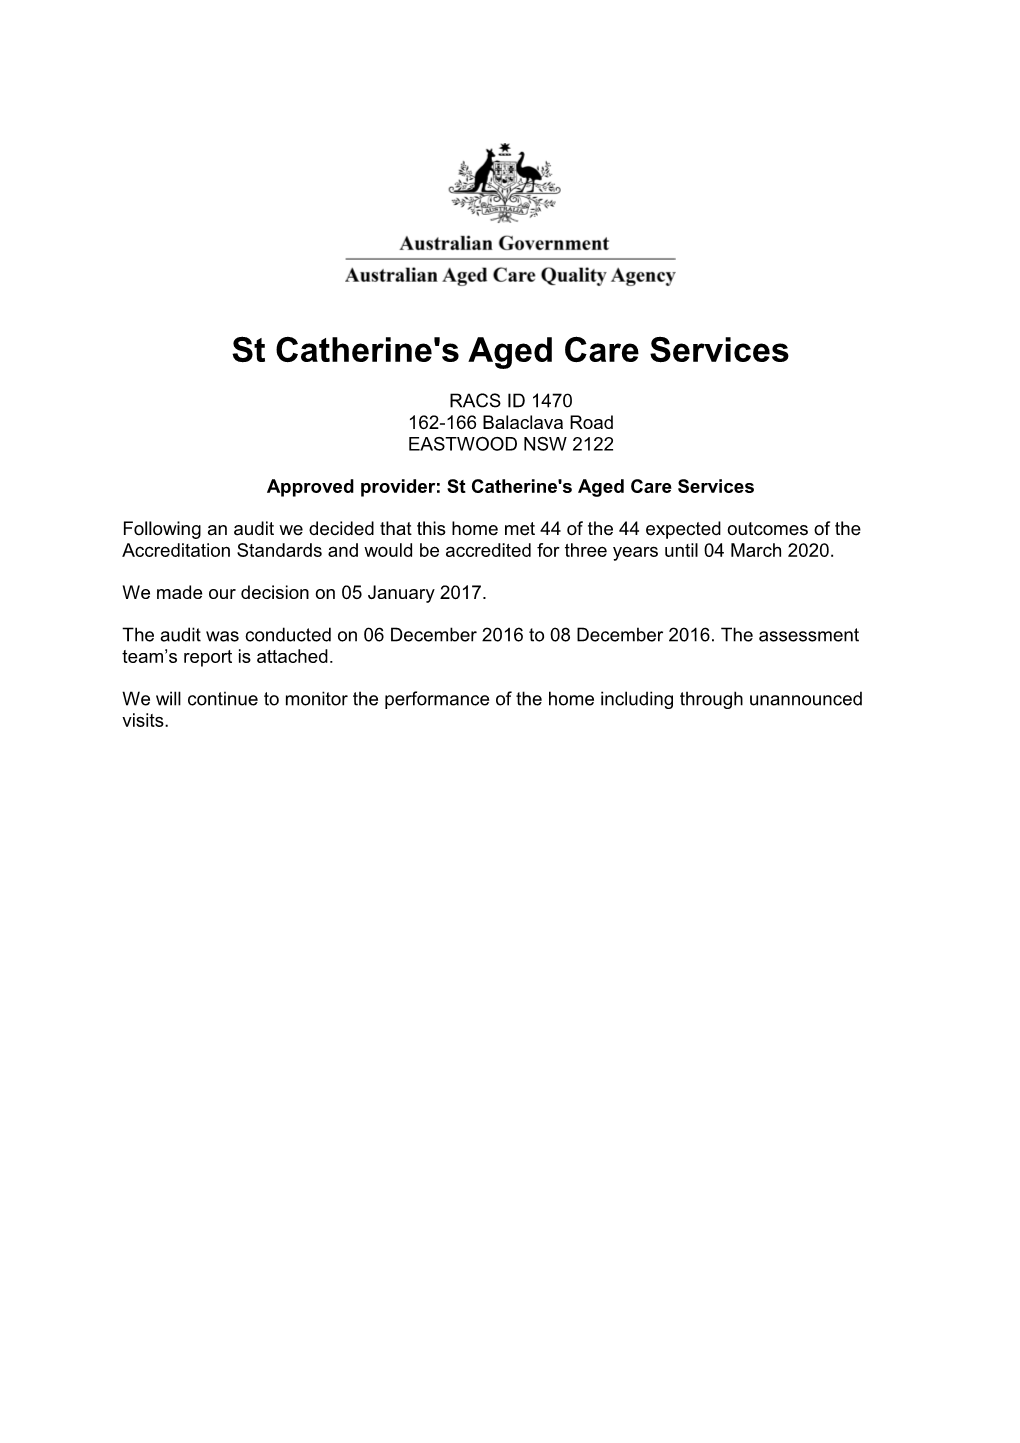 St Catherine's Aged Care Services